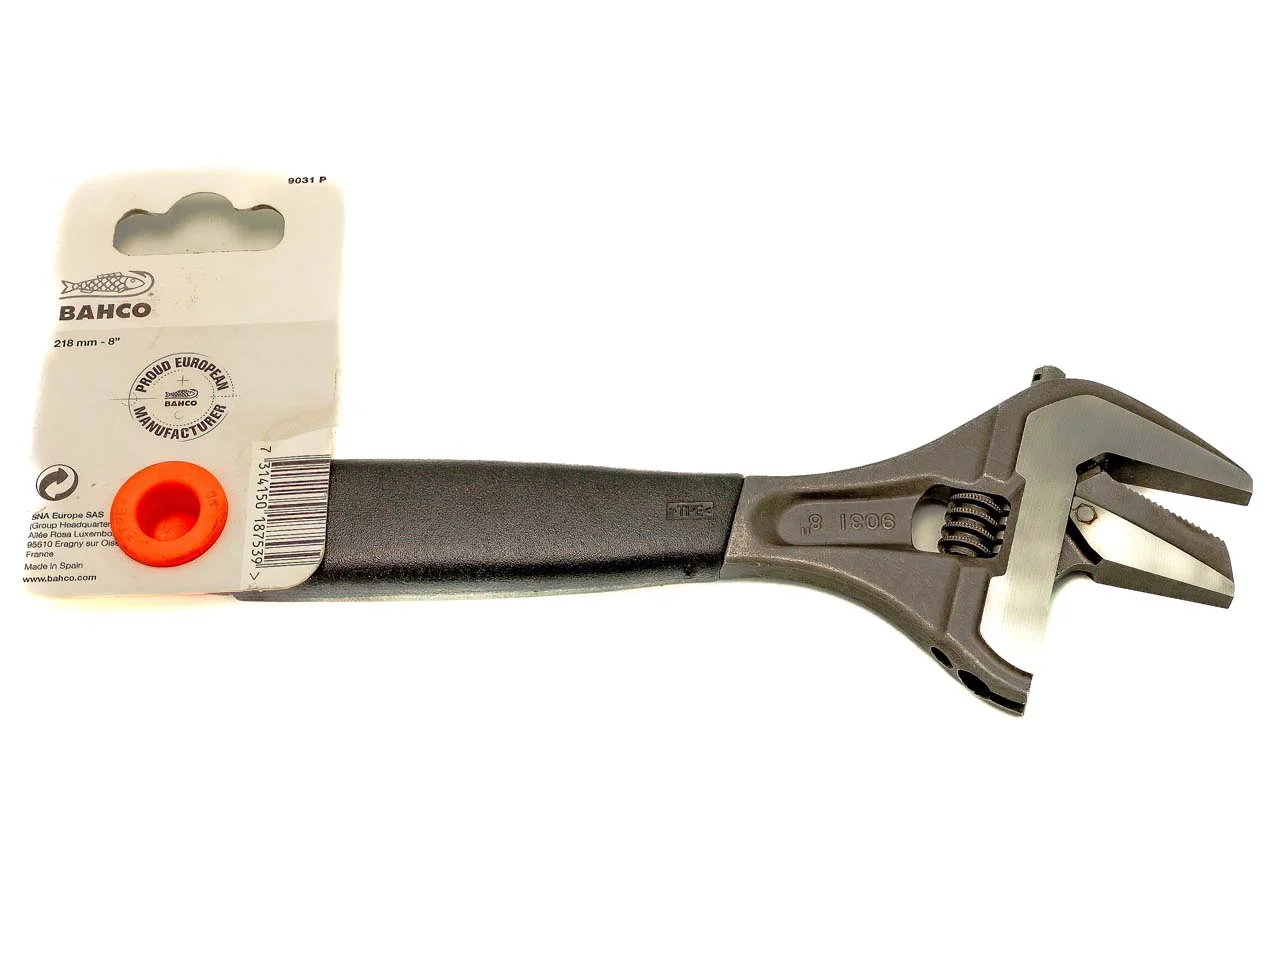 Bahco 9031P Adjustable Spanner 9031 Large jaw opening and reversible jaw